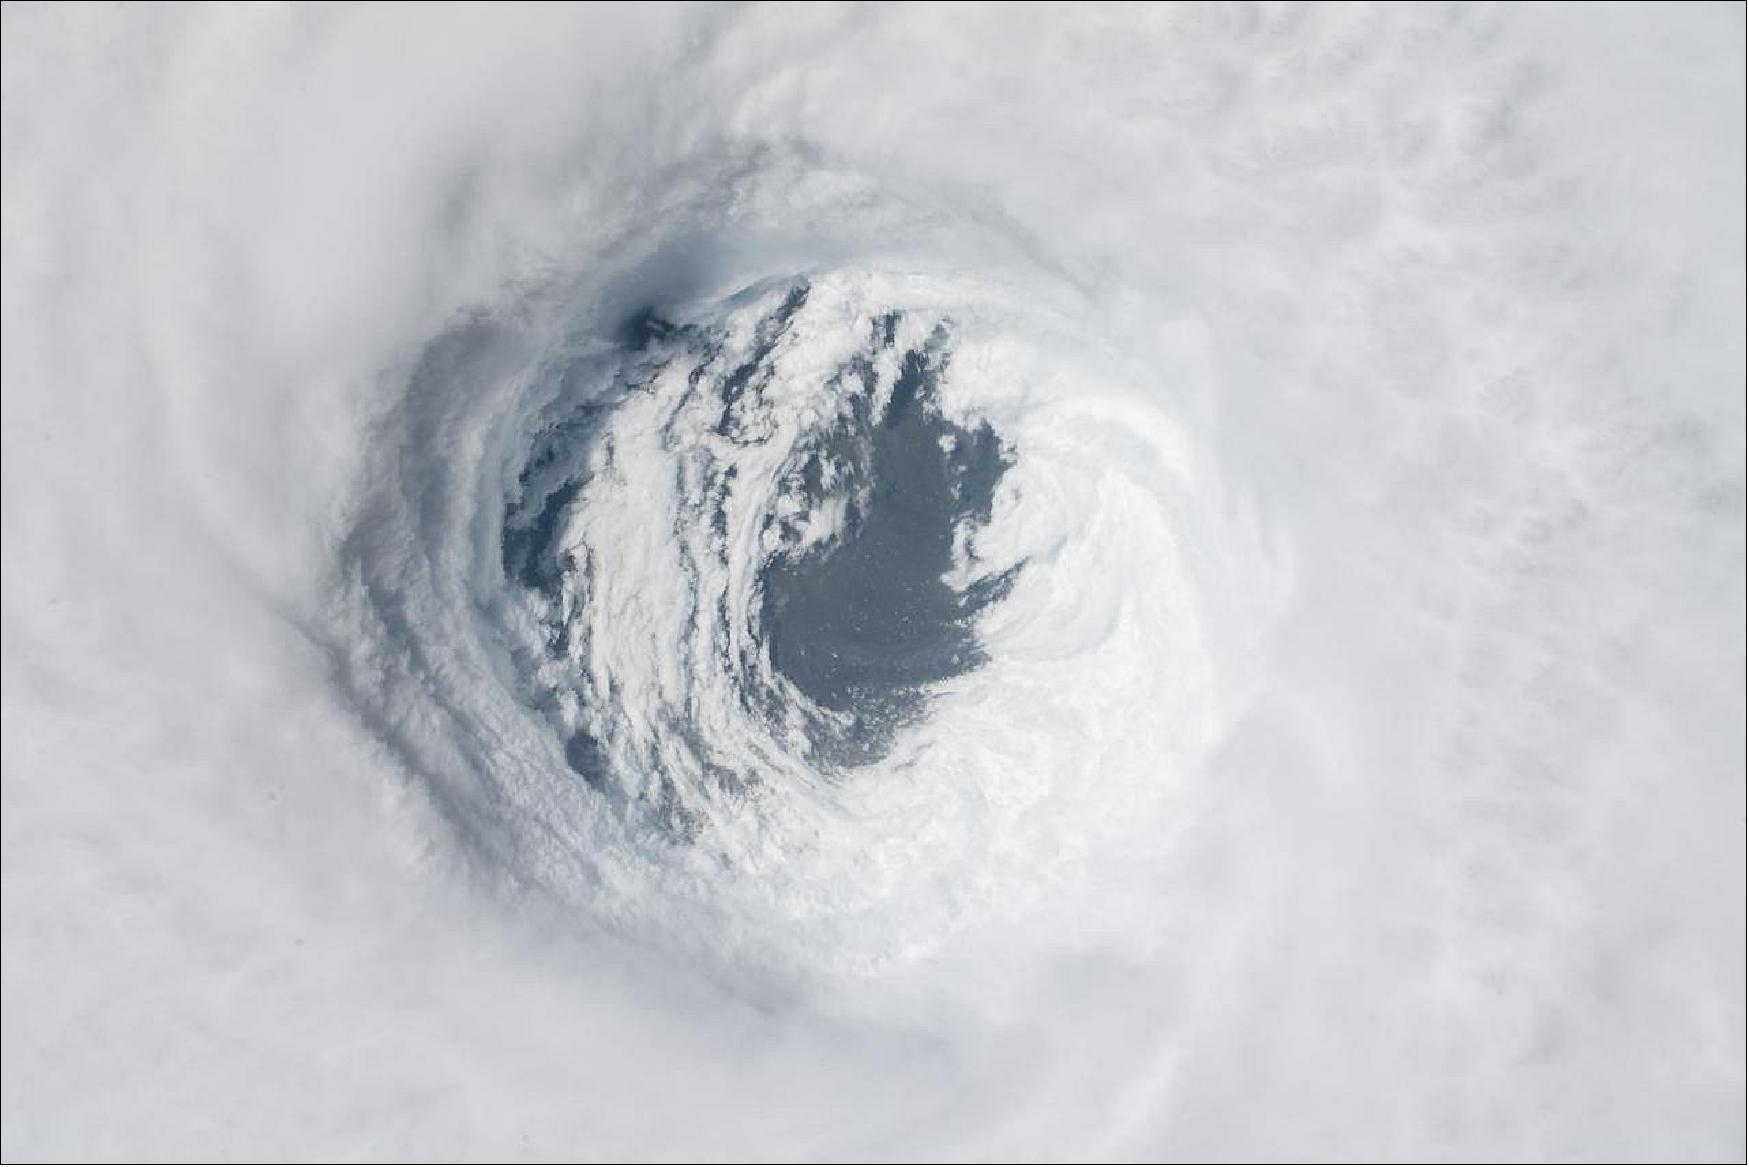 Figure 64: Hurricane Michael was captured from the International Space Station on Oct. 10, 2018, after the storm made landfall as a Category 4 hurricane over the Florida Panhandle. The National Hurricane Center reported maximum sustained winds near 145 mph (233 kph) with the potential to bring dangerous storm surge and heavy rains to the Florida Panhandle (image credit: NASA)